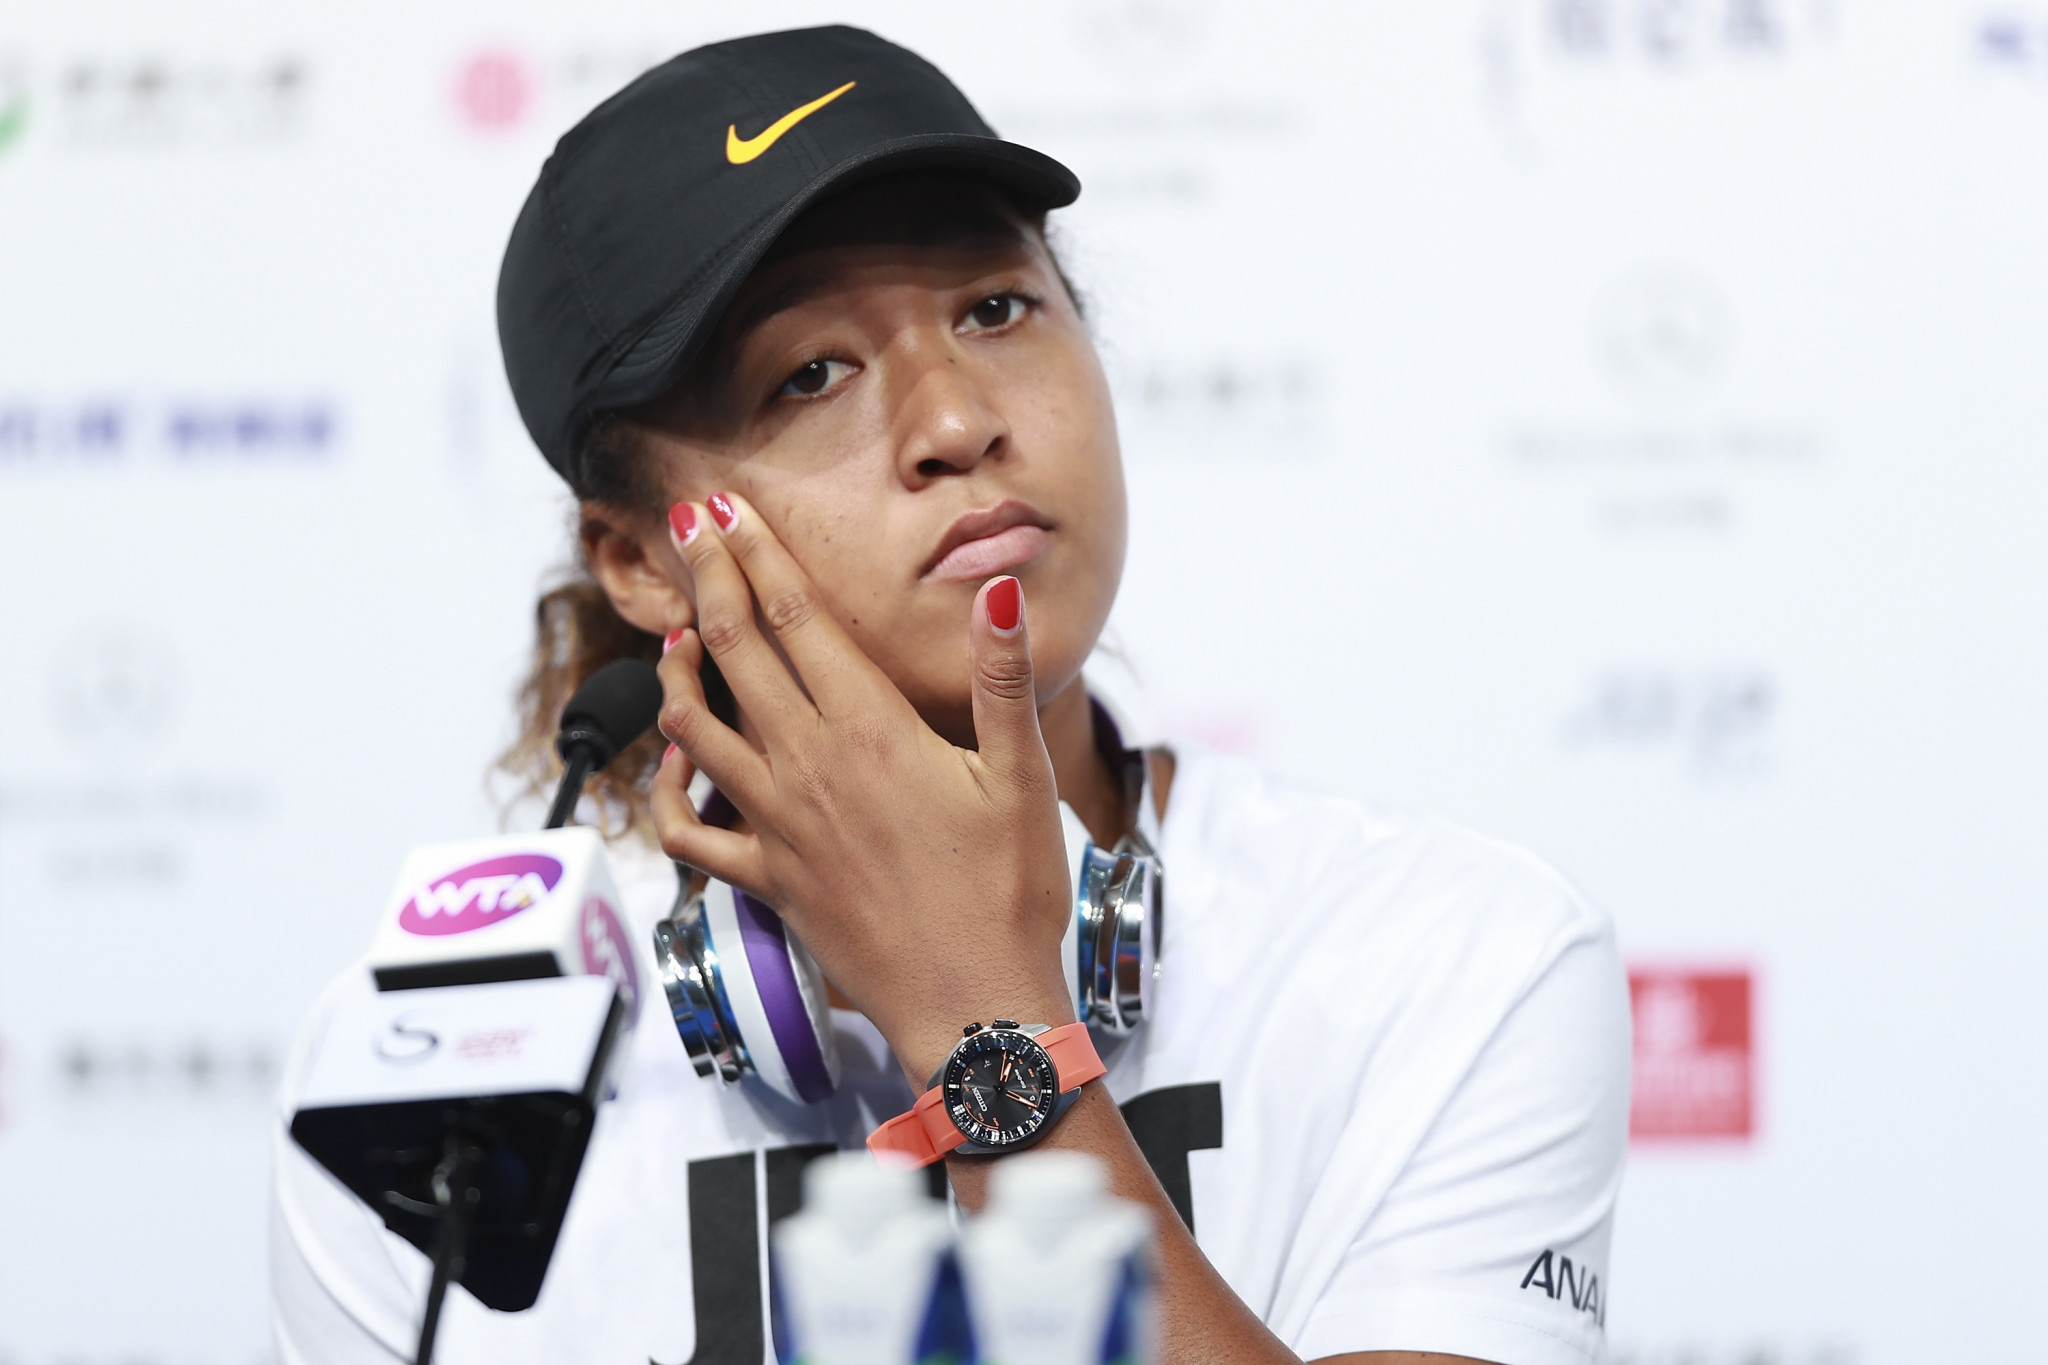 Naomi Osaka caused a storm when she refused to take part in post-match press conferences ©Getty Images